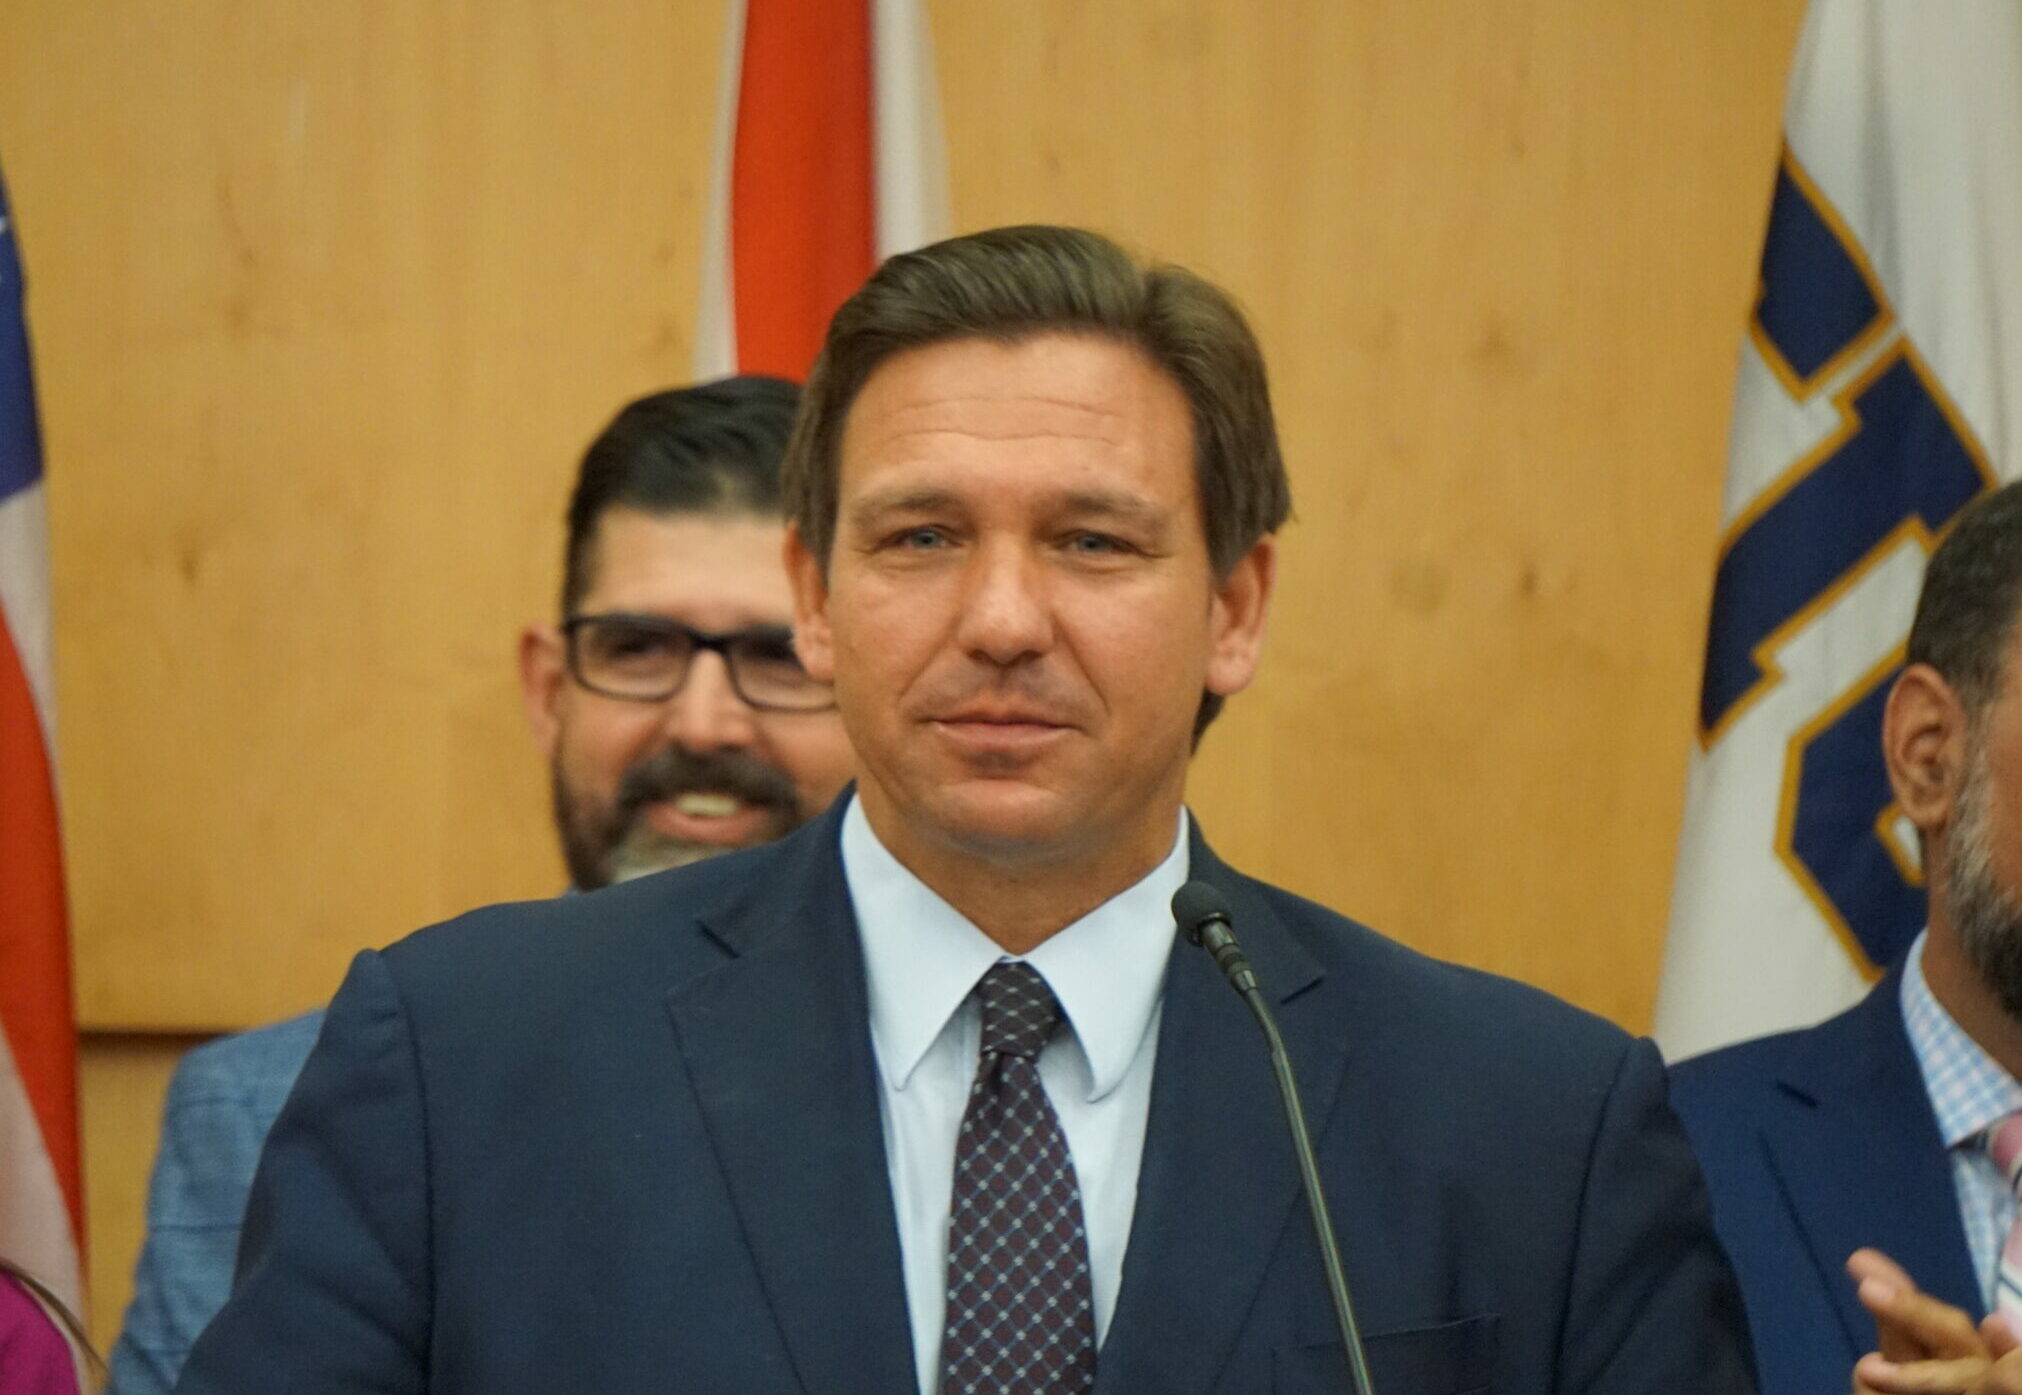 DeSantis Takes Victory lap, says Florida Democrats 'all in favor of people losing their jobs'